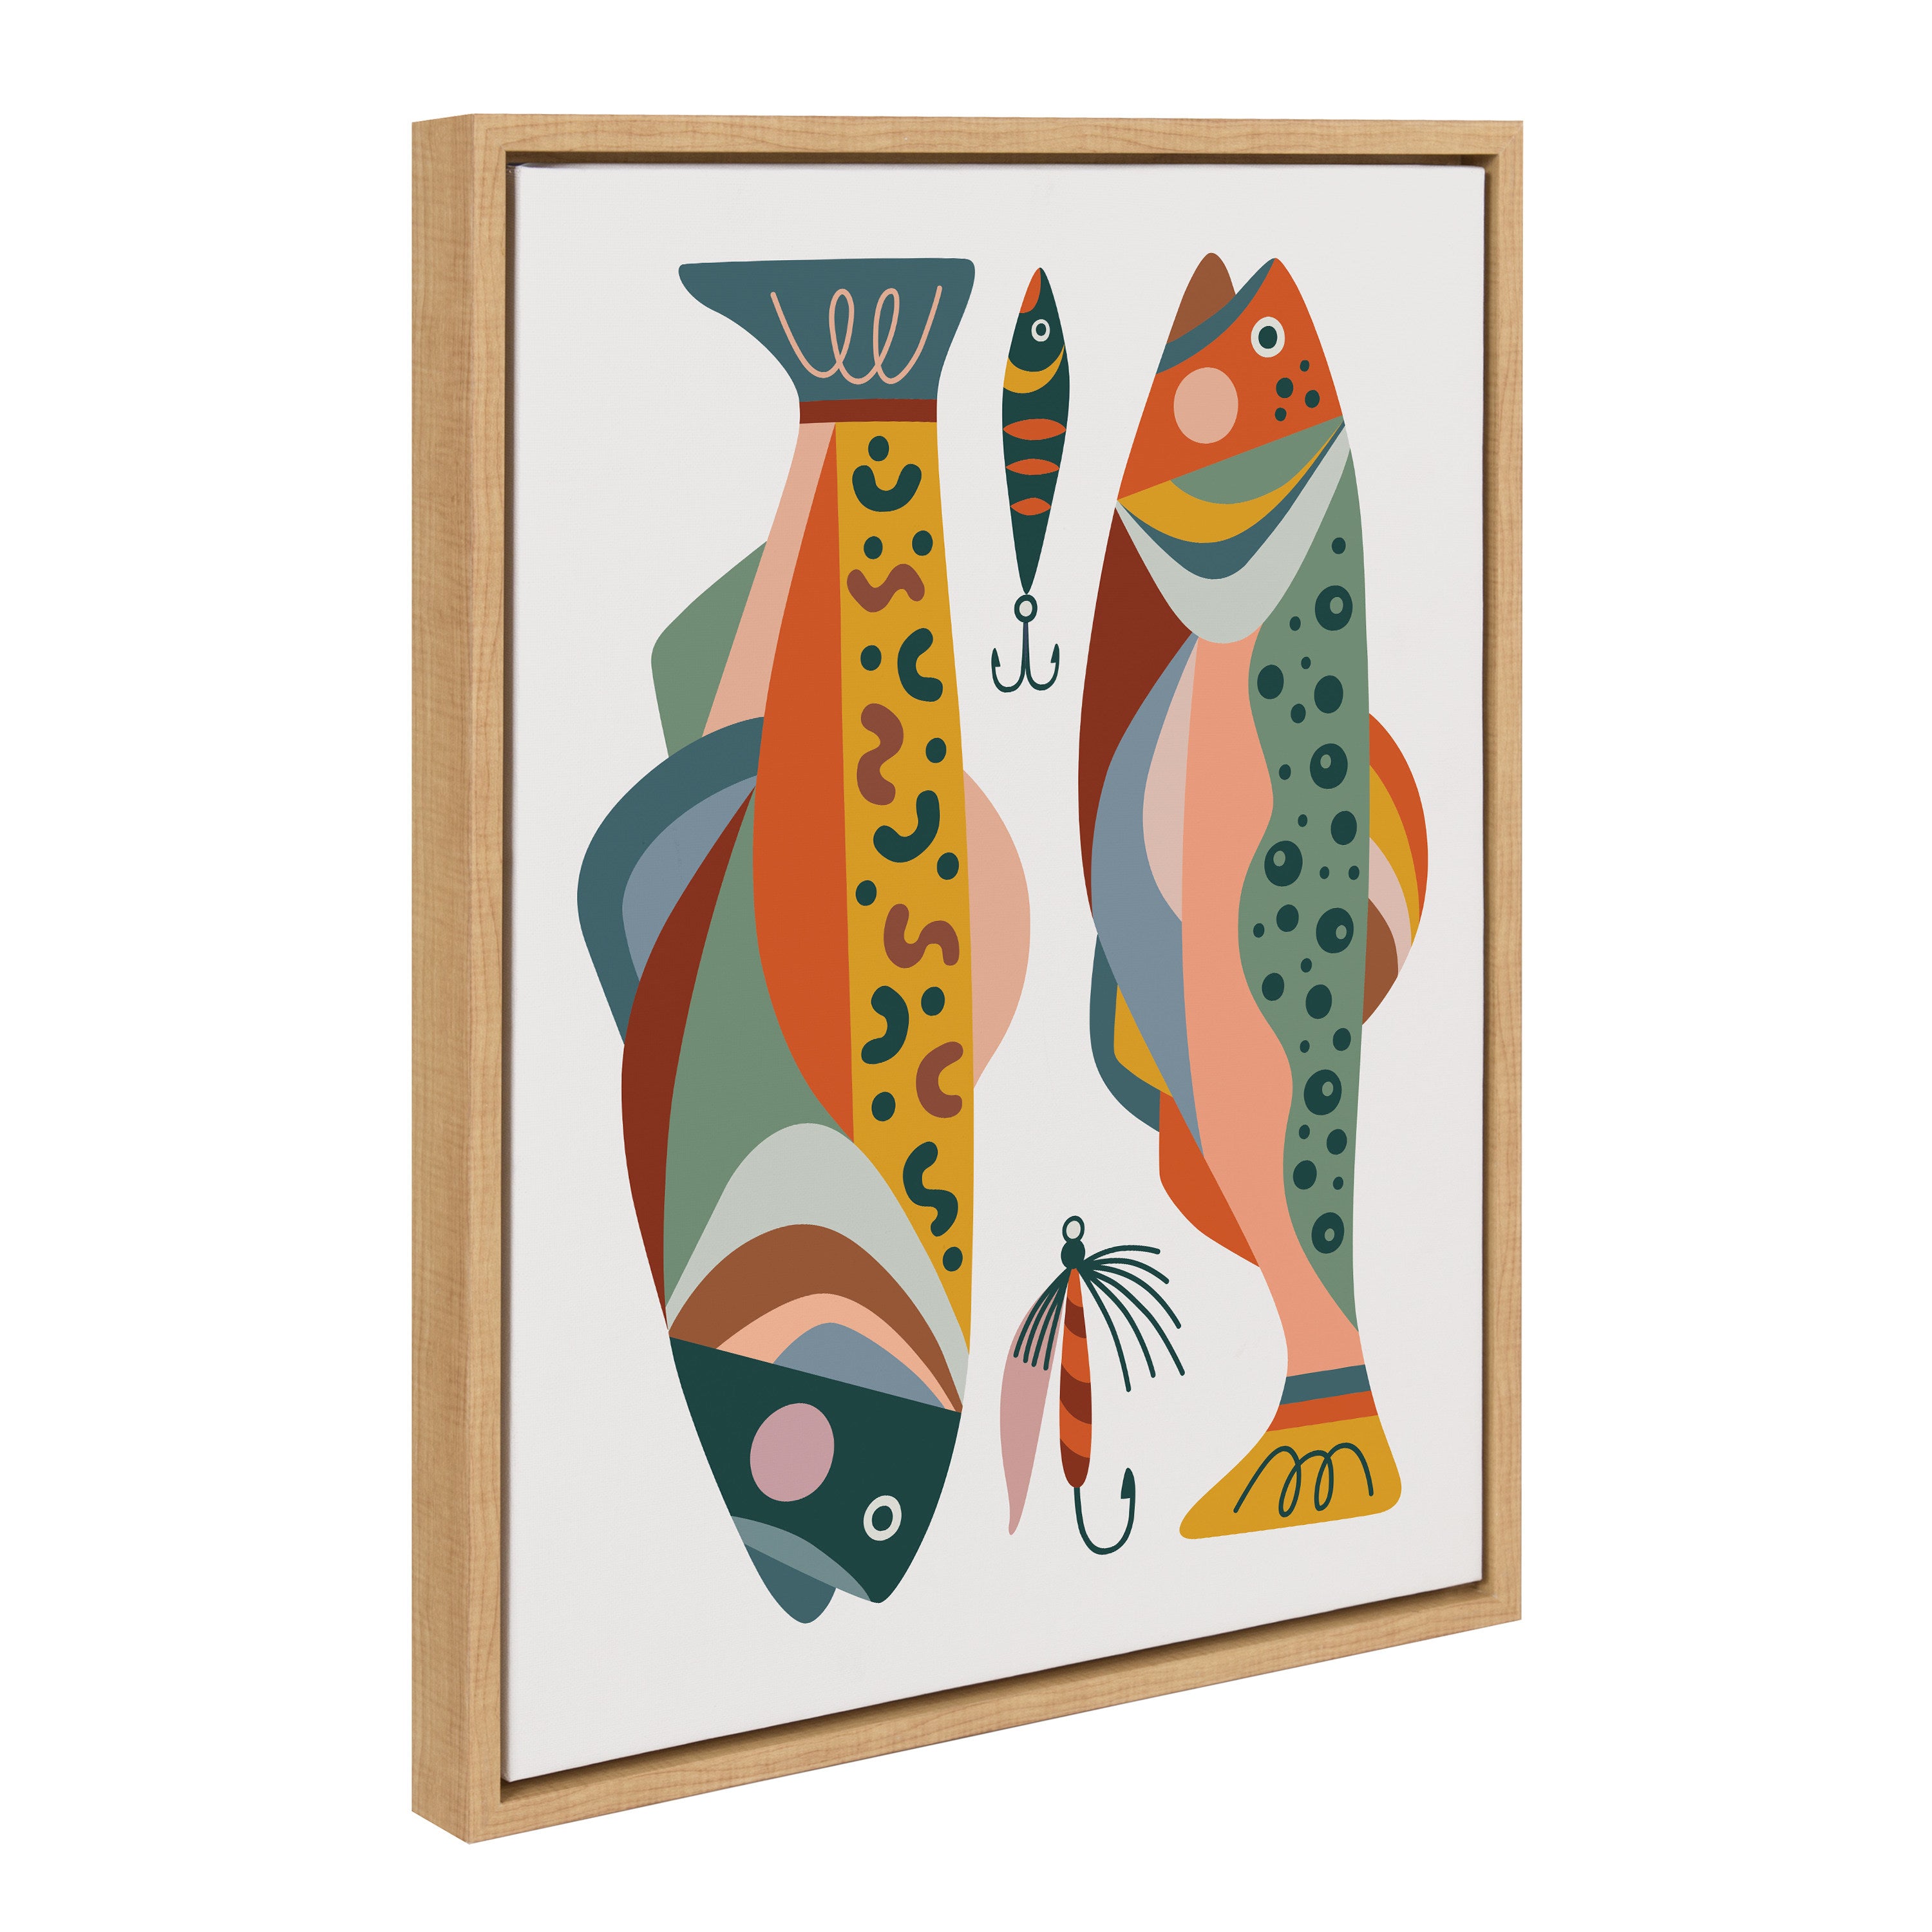 Kate and Laurel Sylvie Gone Fishing Framed Canvas Wall Art by Rachel Lee of  My Dream Wall, 23x33 Natural, Bright Colorful Fish Art Print for Wall Decor  – kateandlaurel